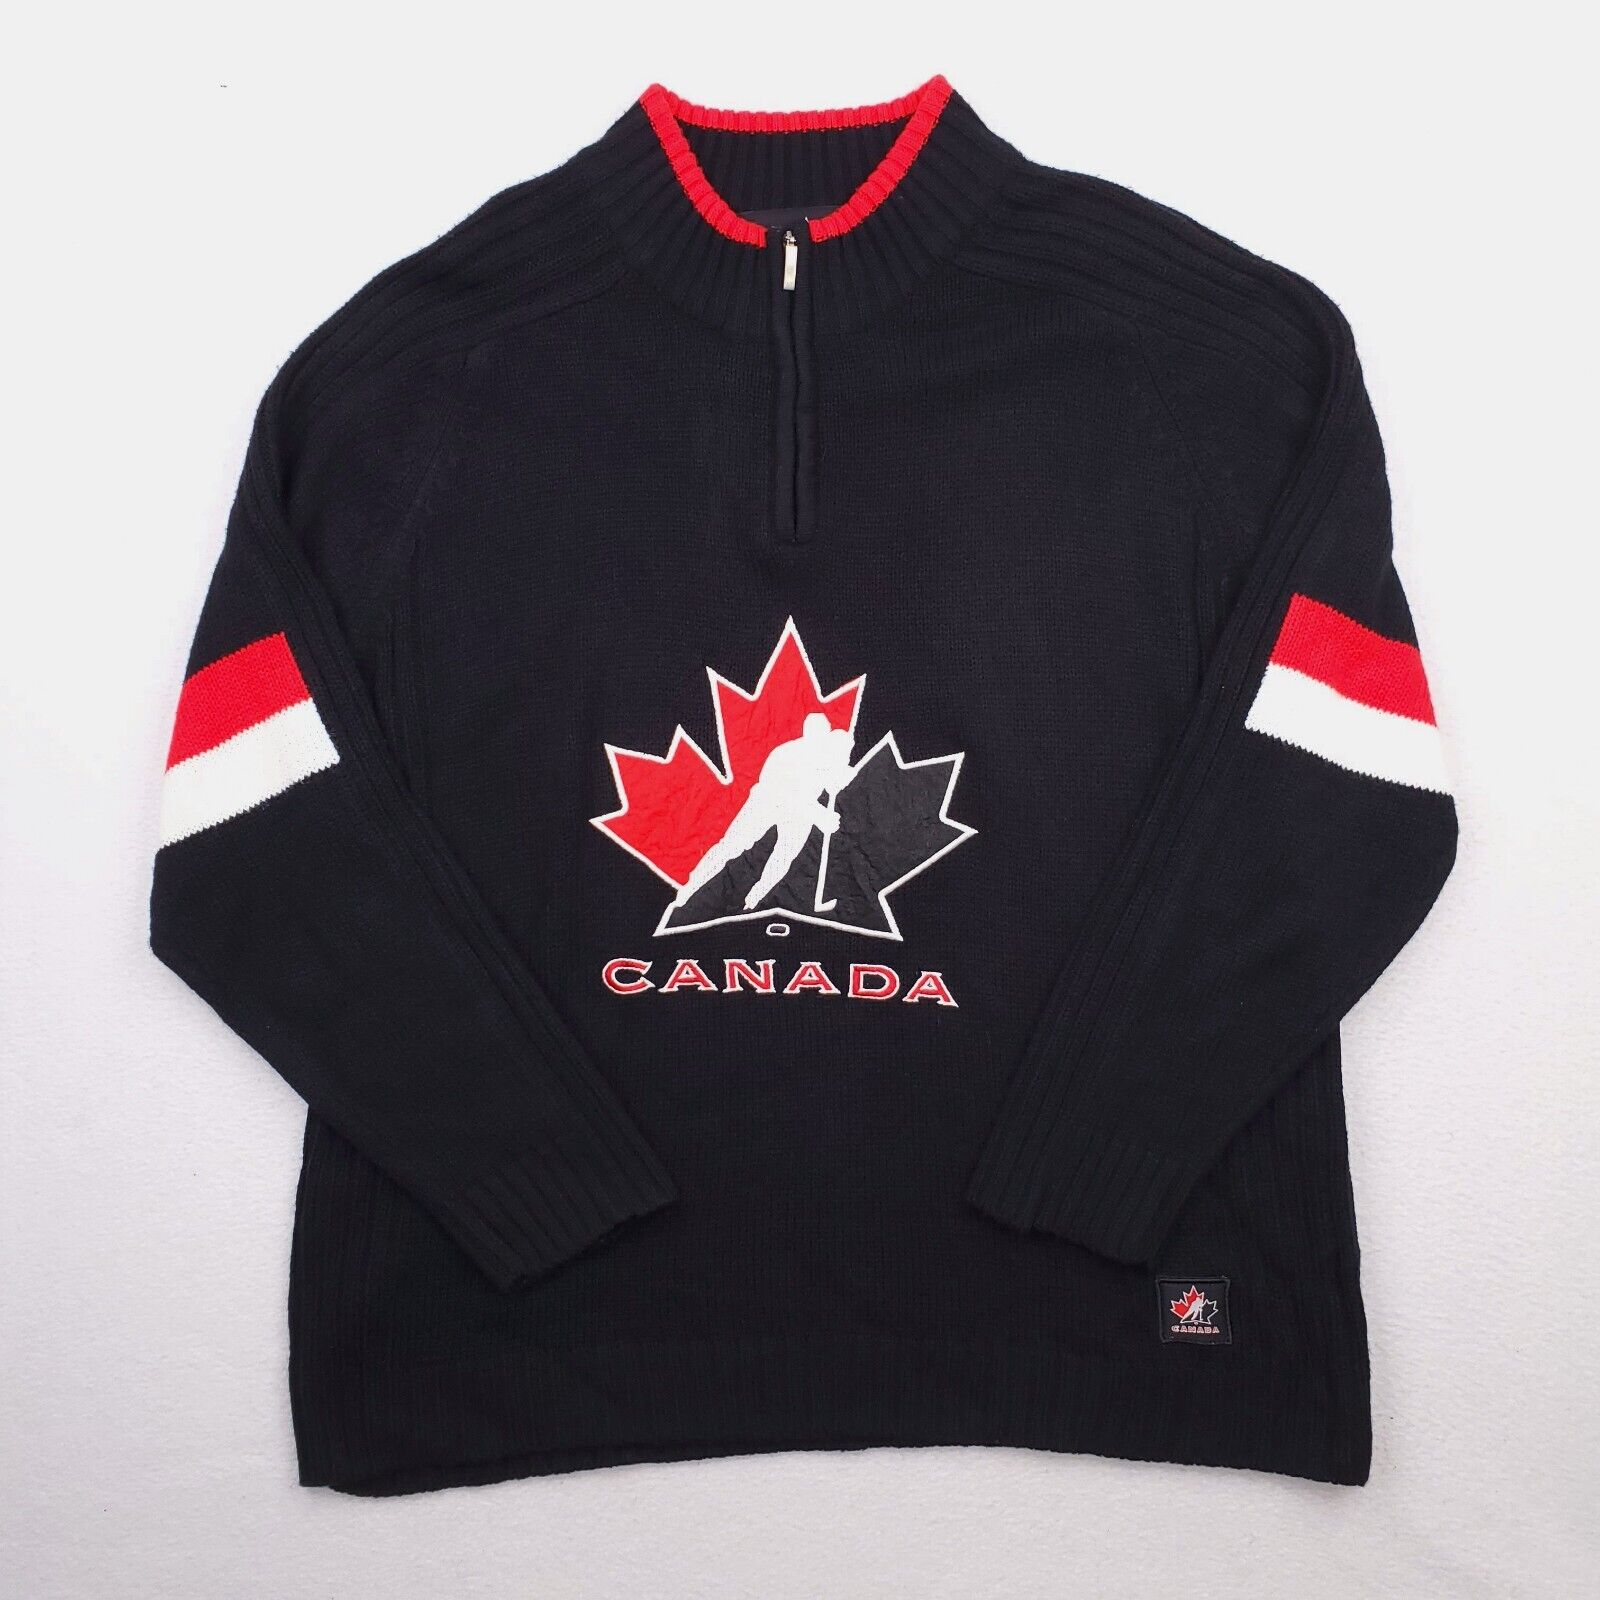 Vintage Team Canada Sweater Mens XL Black Red 1/4 Zip Pullover Mock Heavyweight